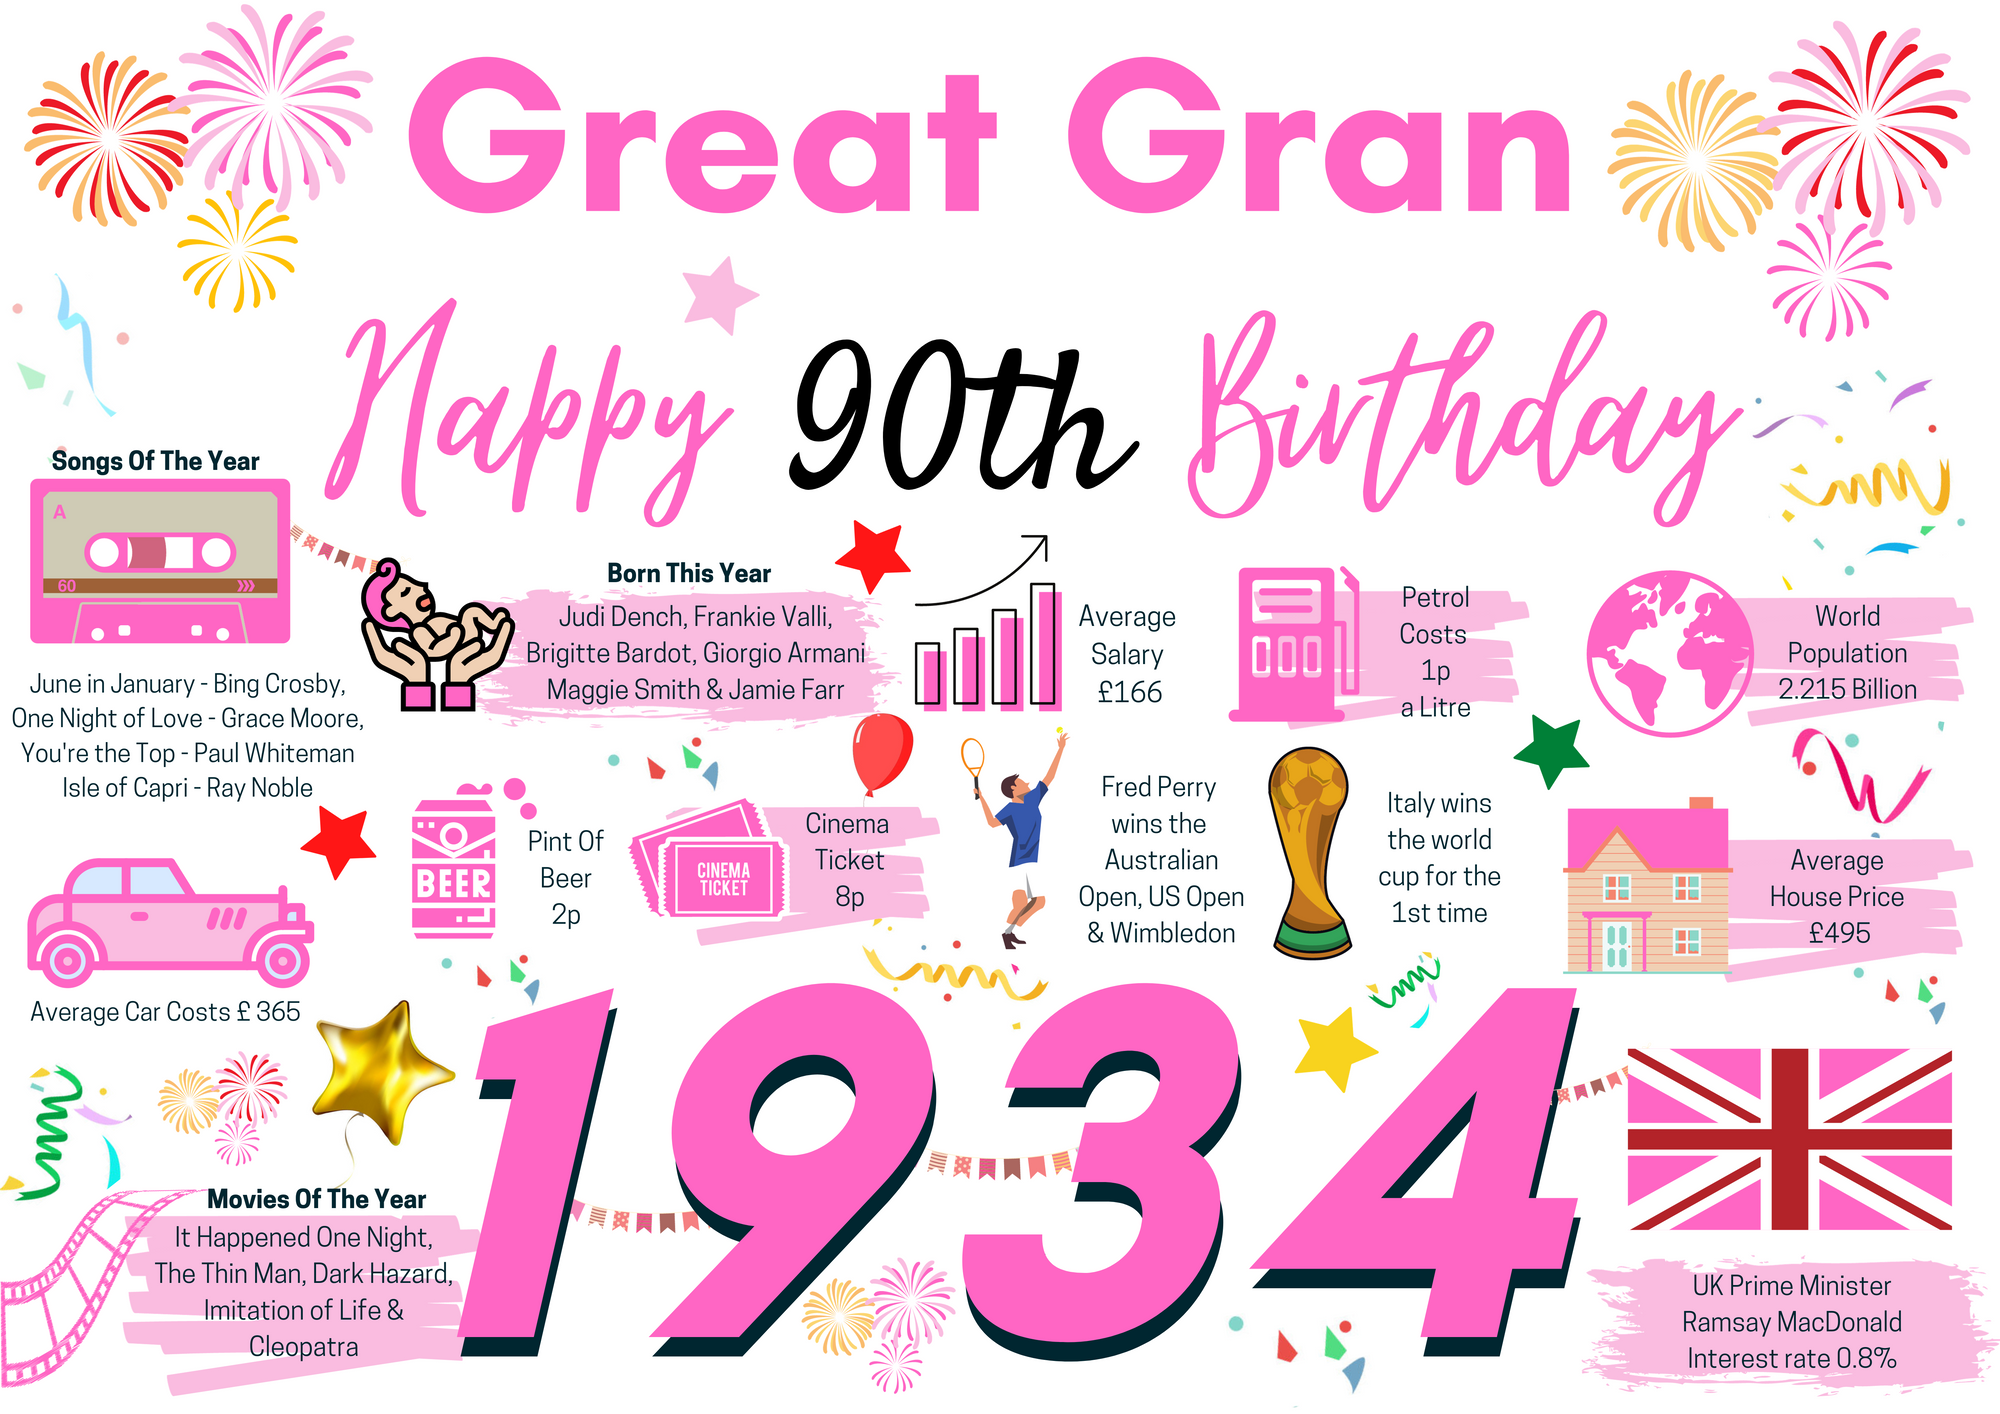 90th Birthday Card For GREAT GRAN Birthday Card For Her, Happy 90th Greetings Card Born In 1934 Facts